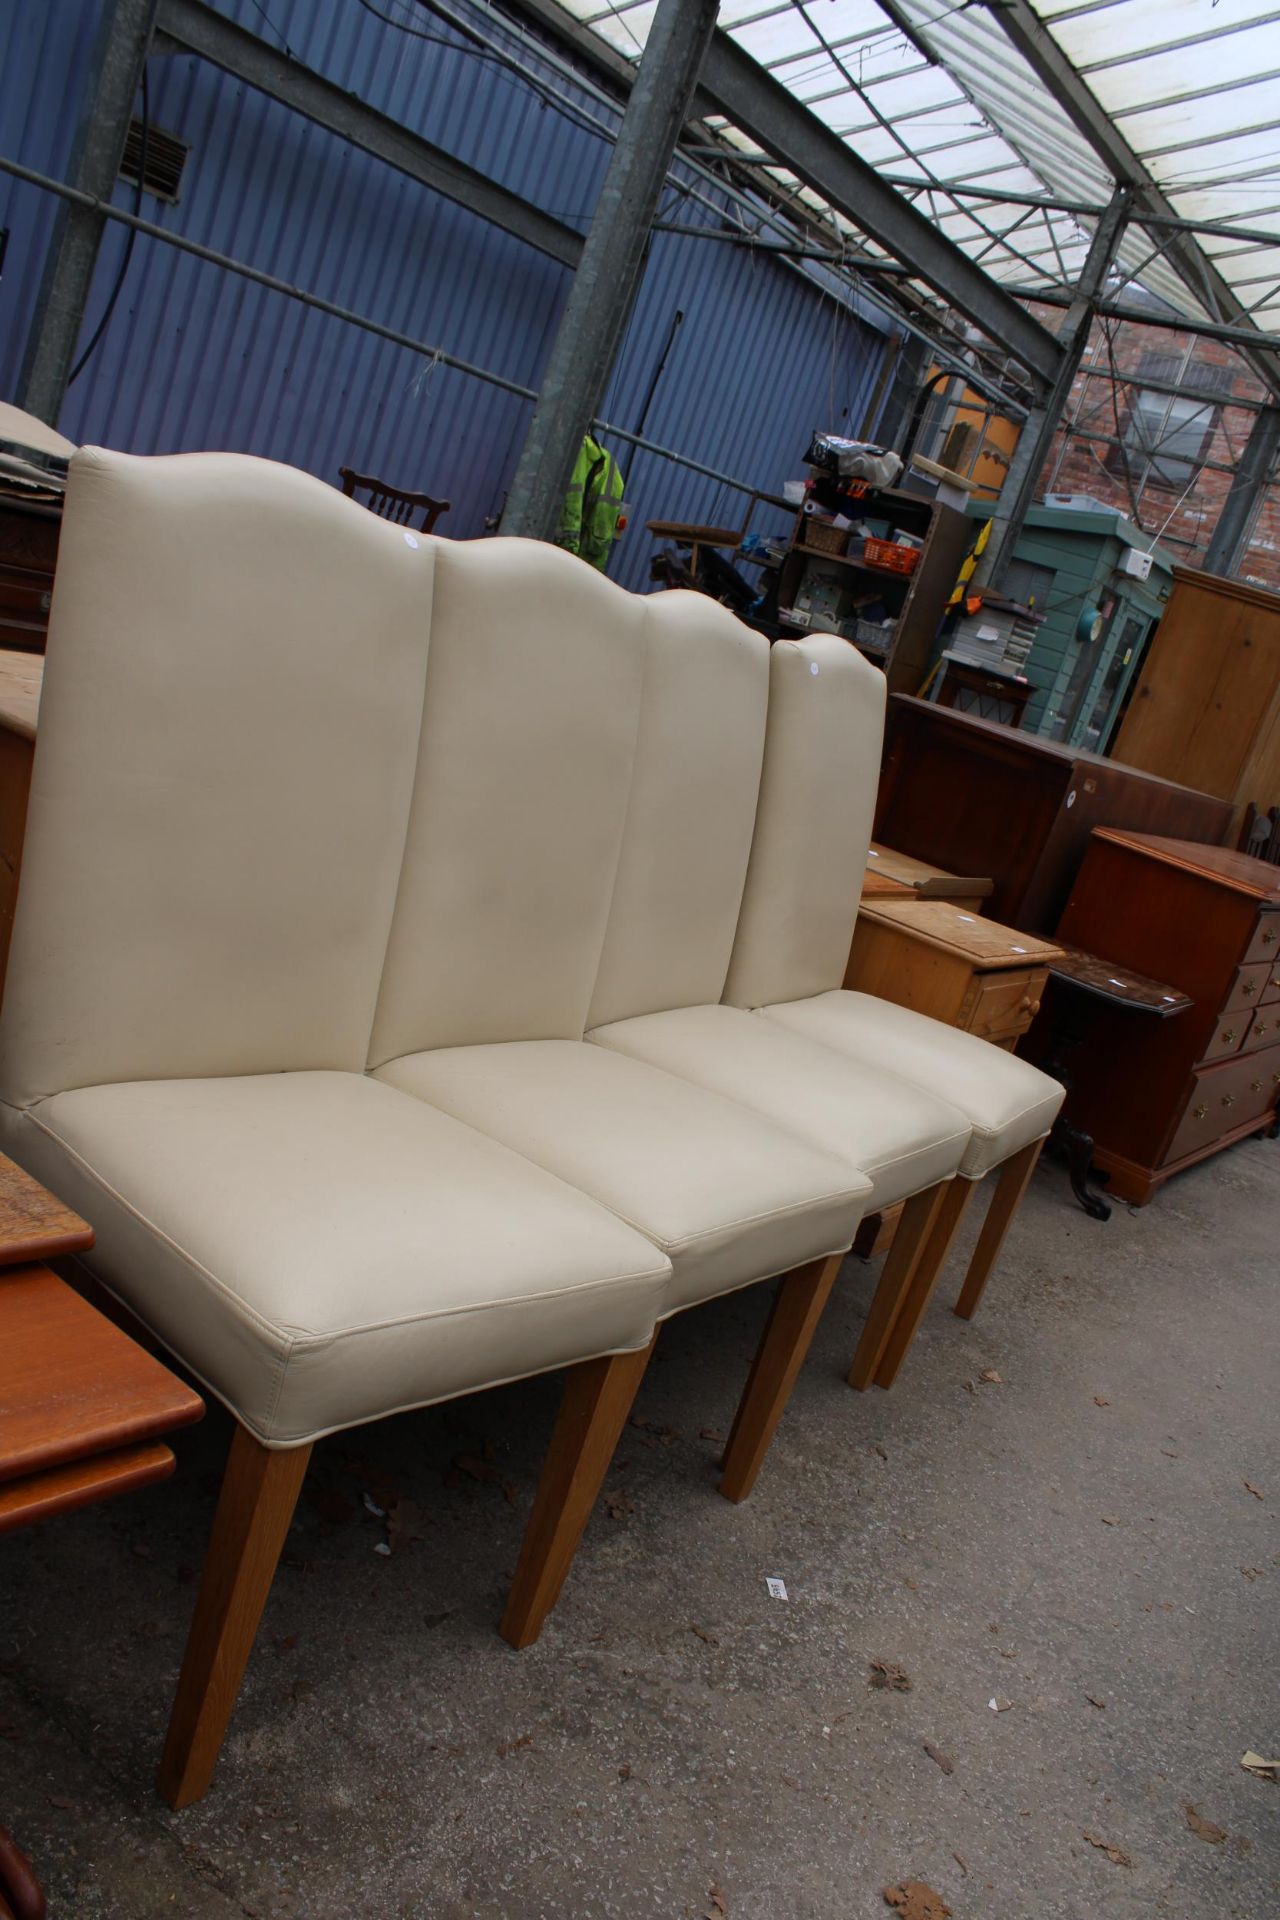 FOUR MODERN BENTLEY DESIGN FAUX LEATHER DINING CHAIRS - Image 2 of 2